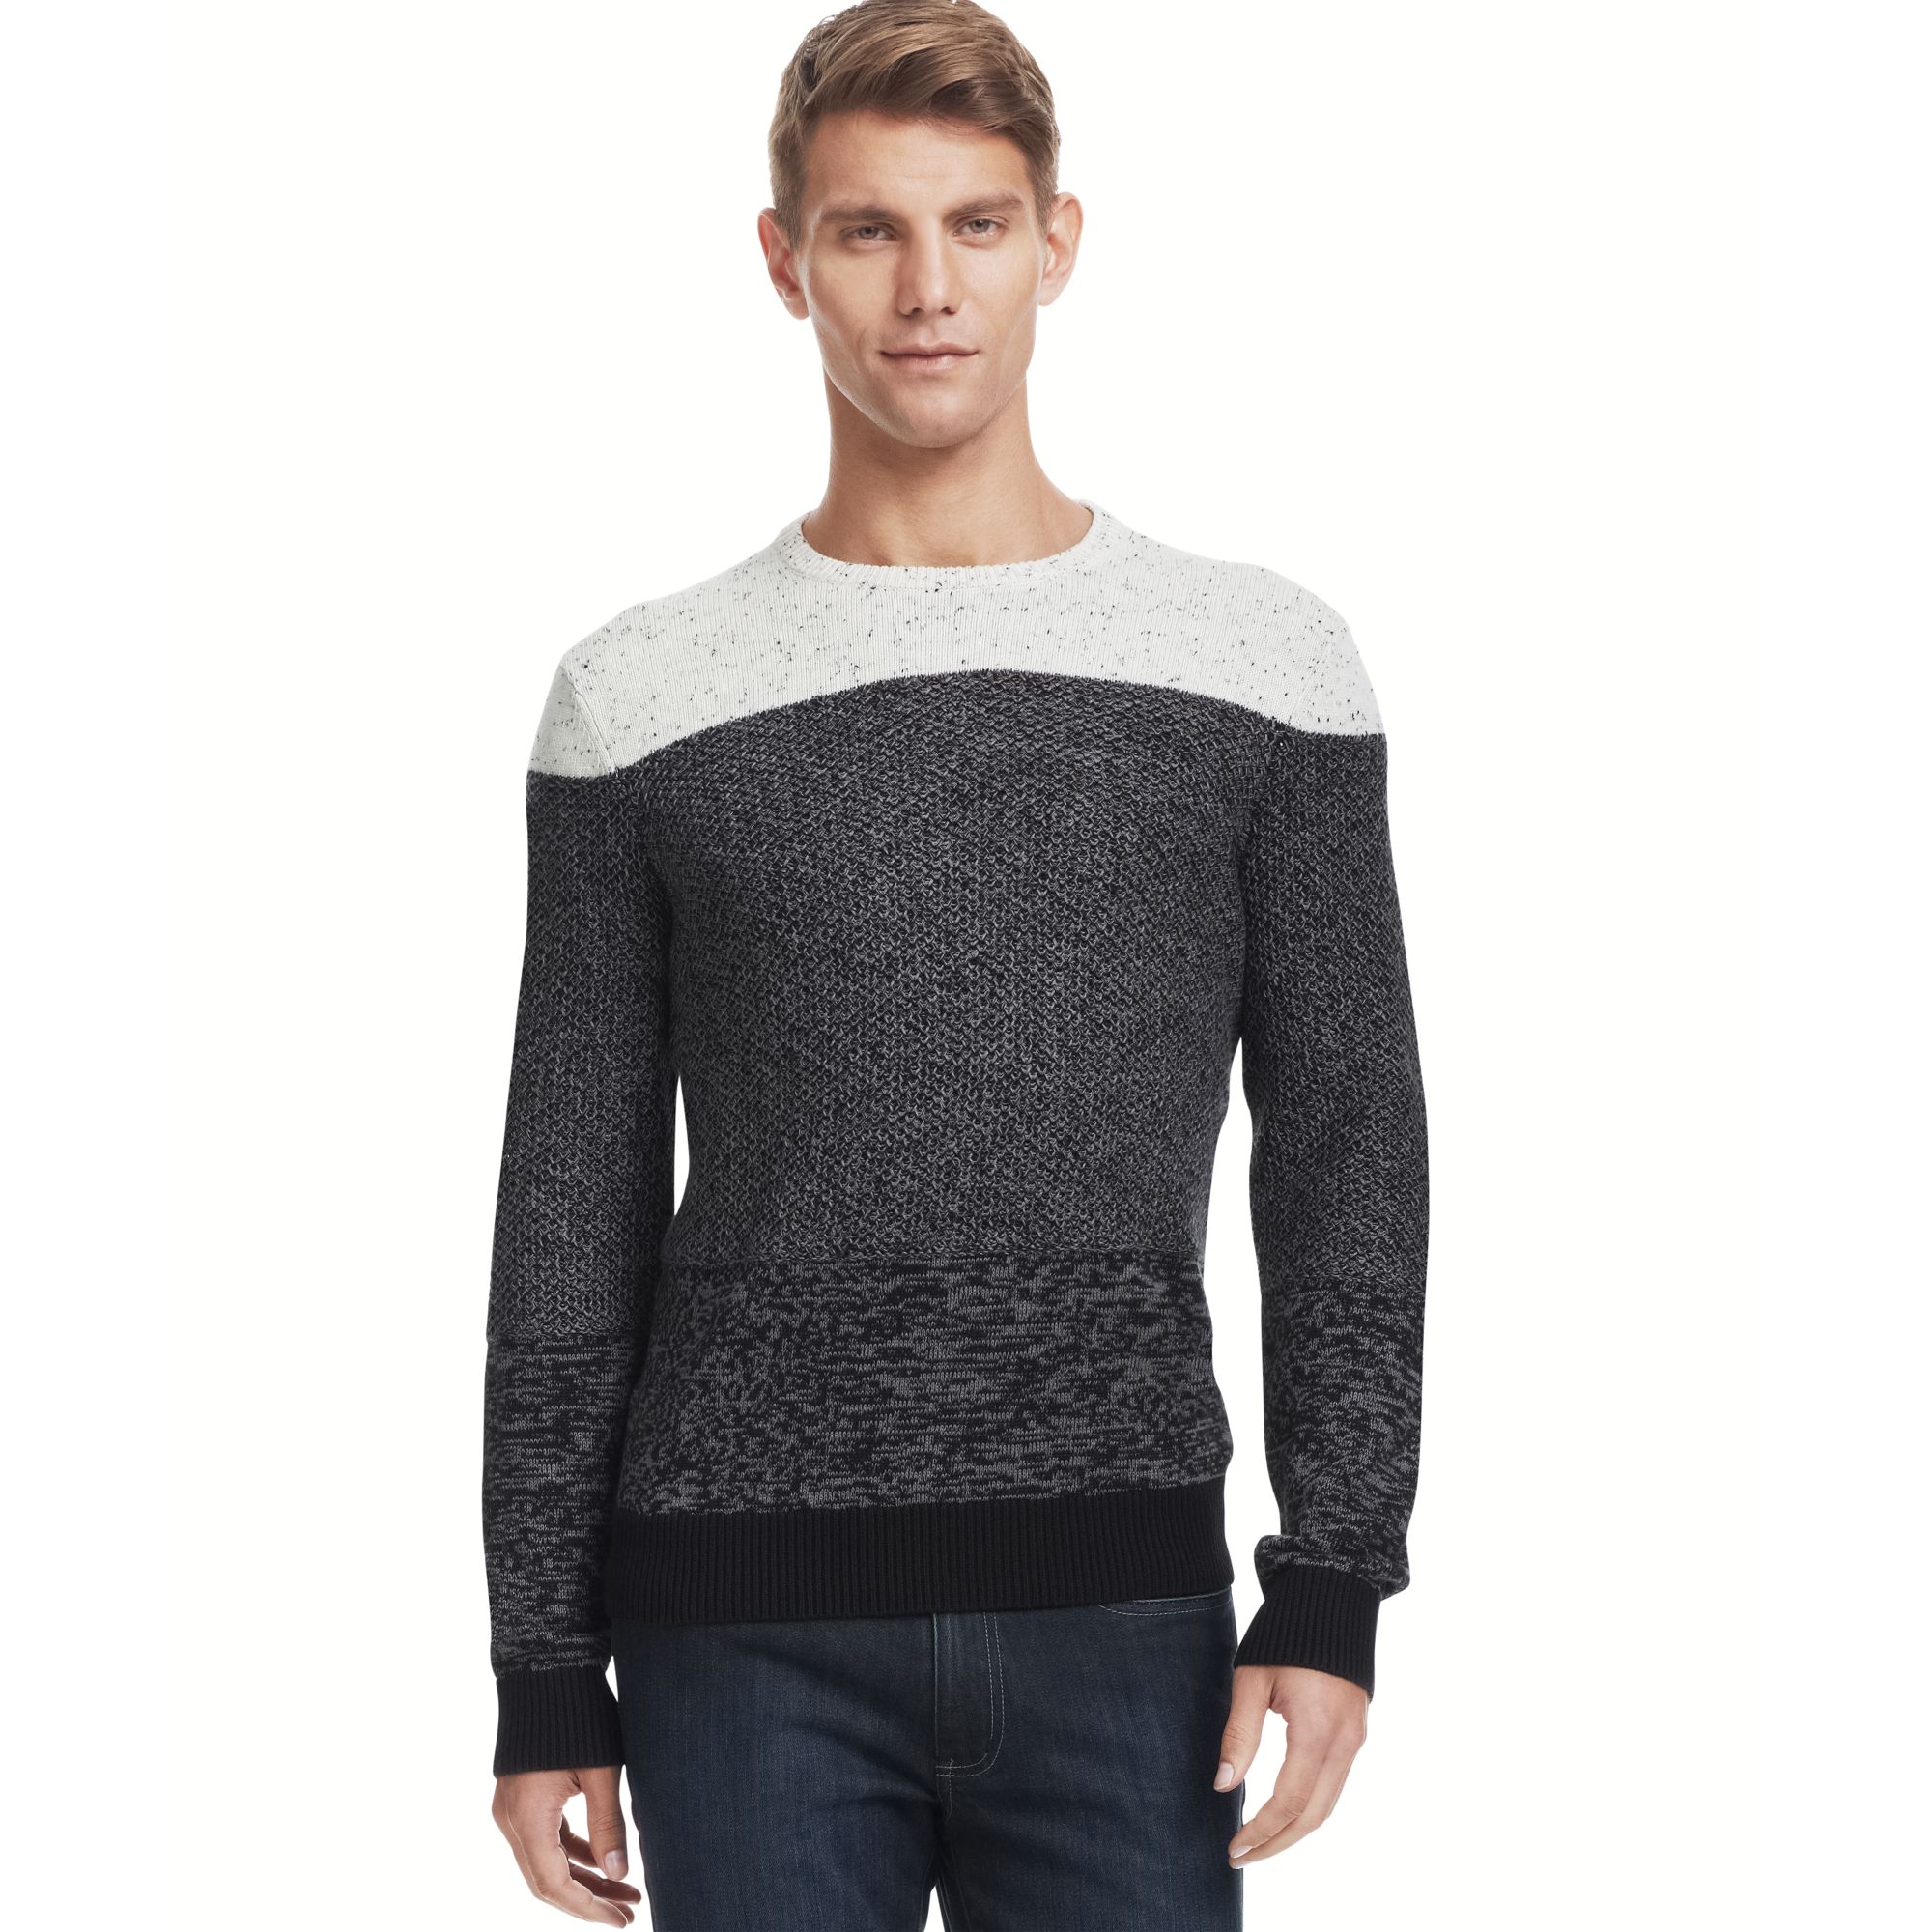 Kenneth Cole REACTION Mens Colorblock Striped Marled Crew Neck Sweater